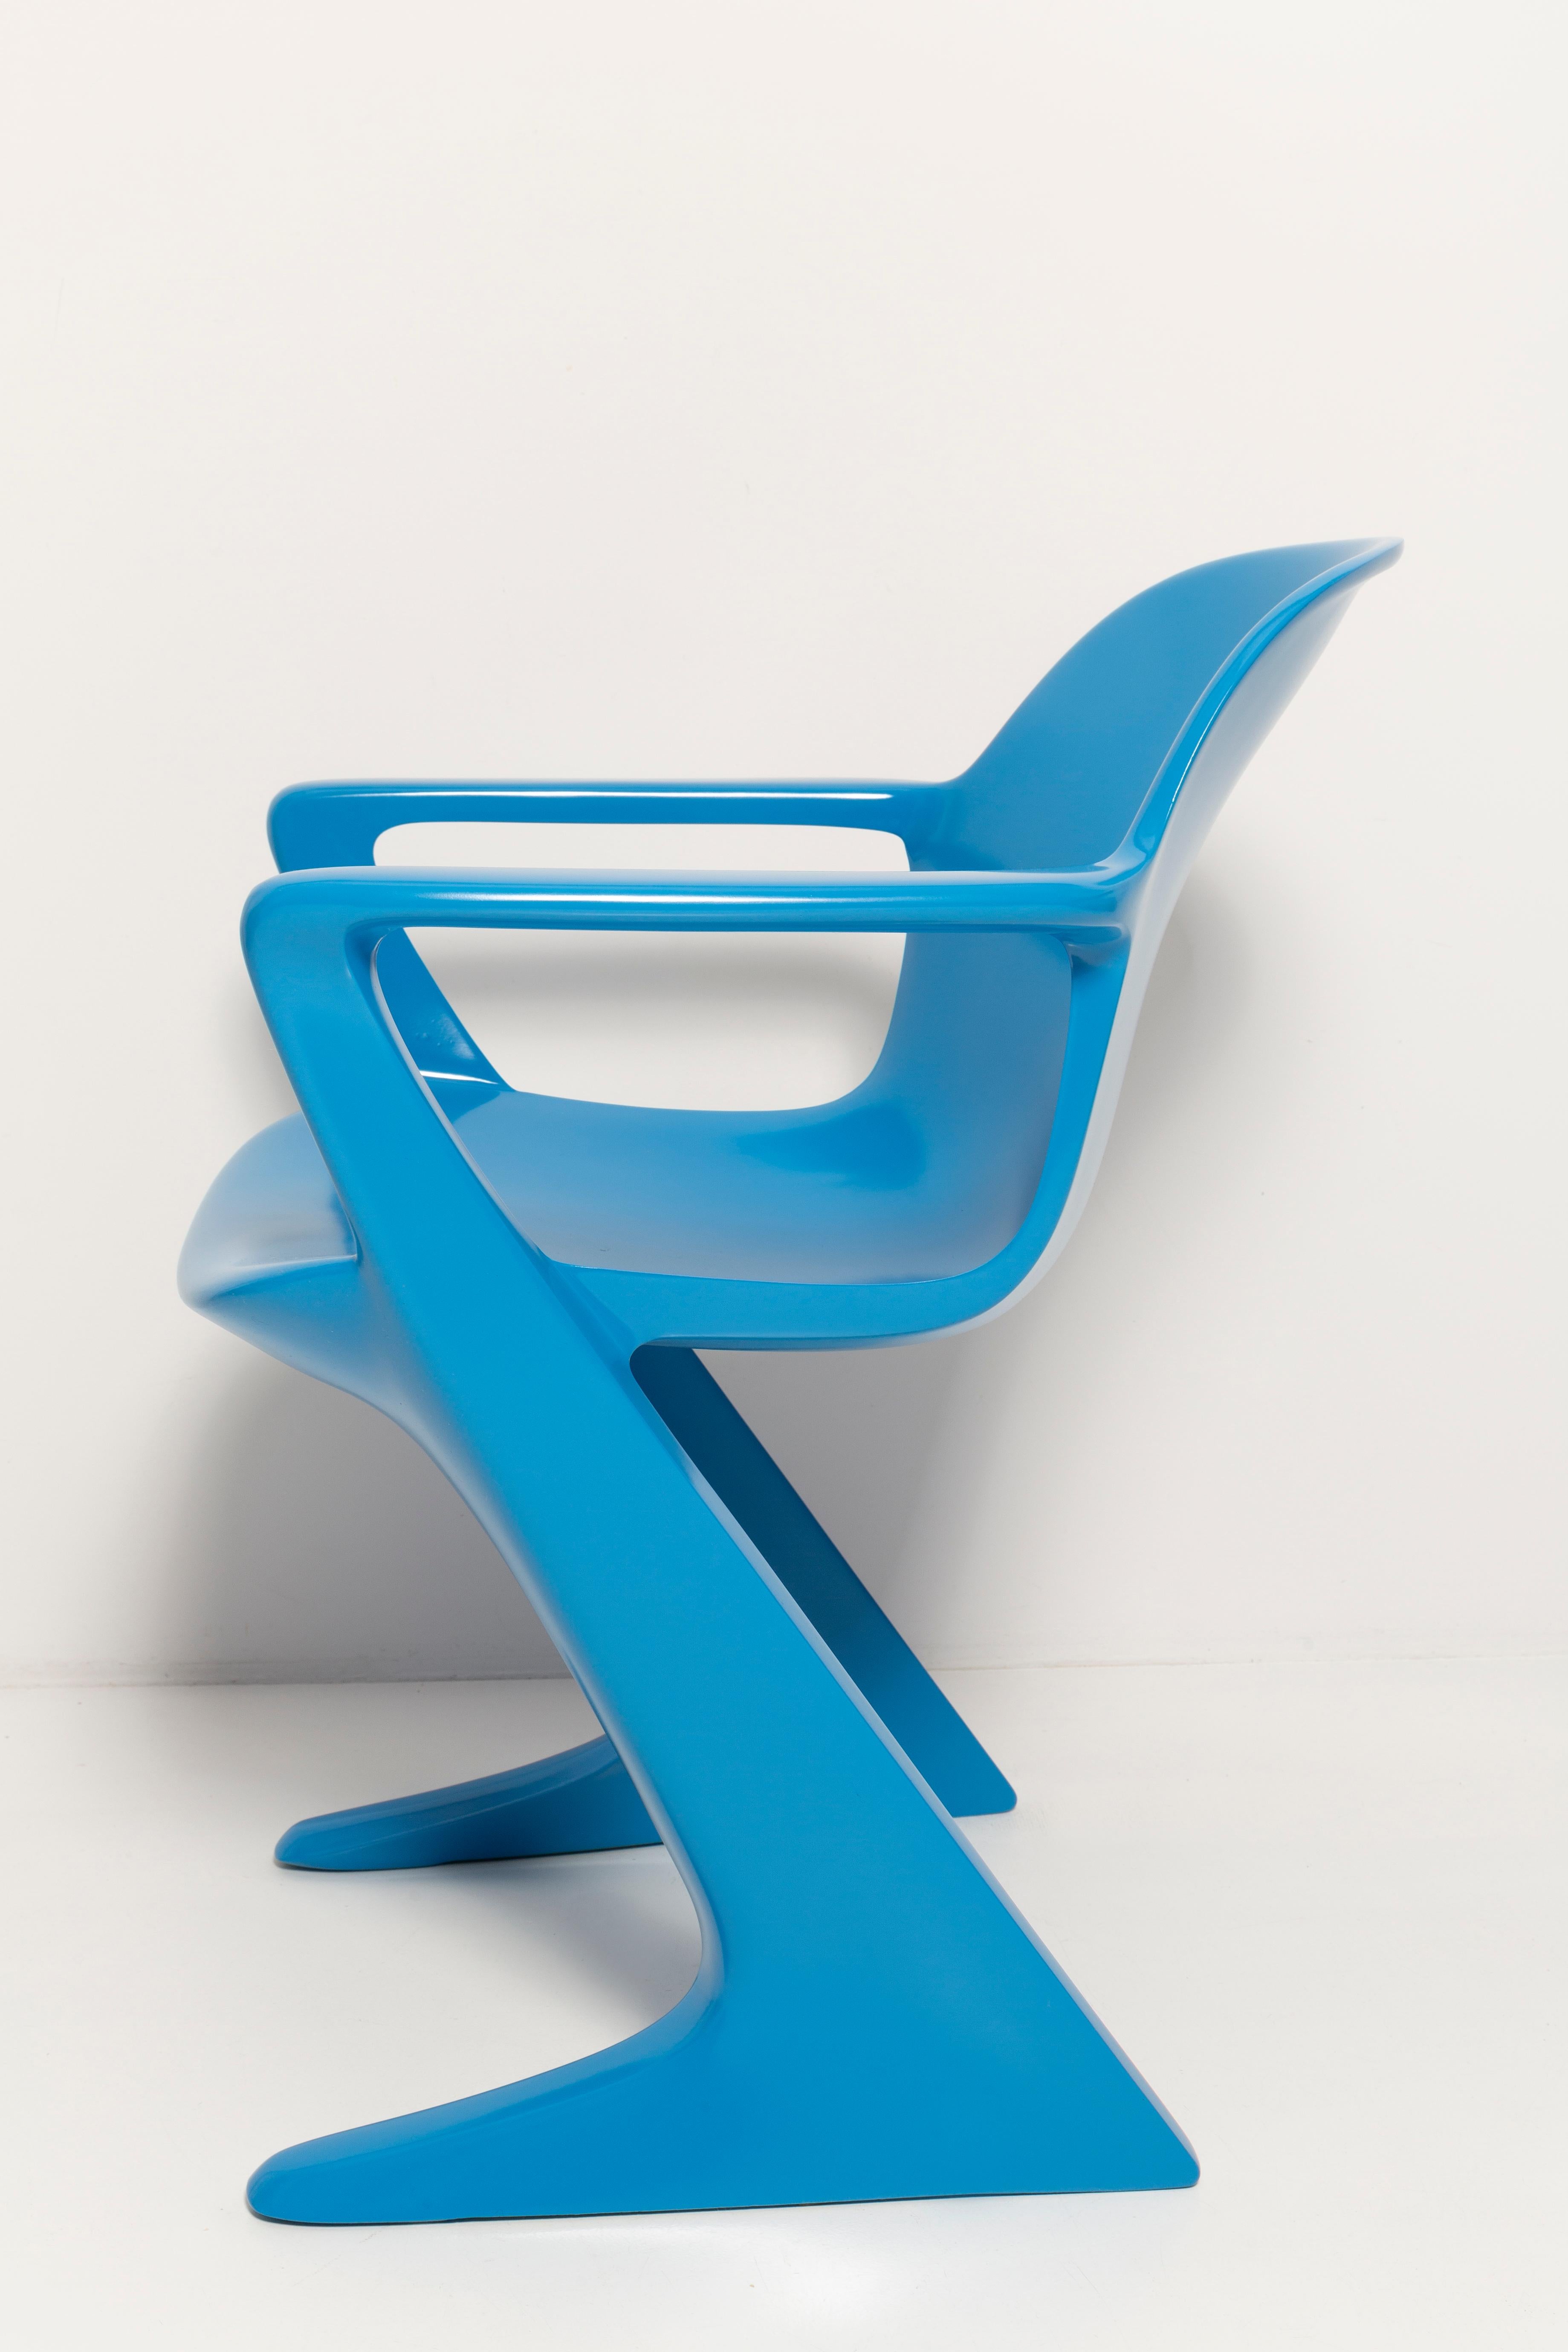 Set of Four Blue Kangaroo Chairs Designed by Ernst Moeckl, Germany, 1960s For Sale 1